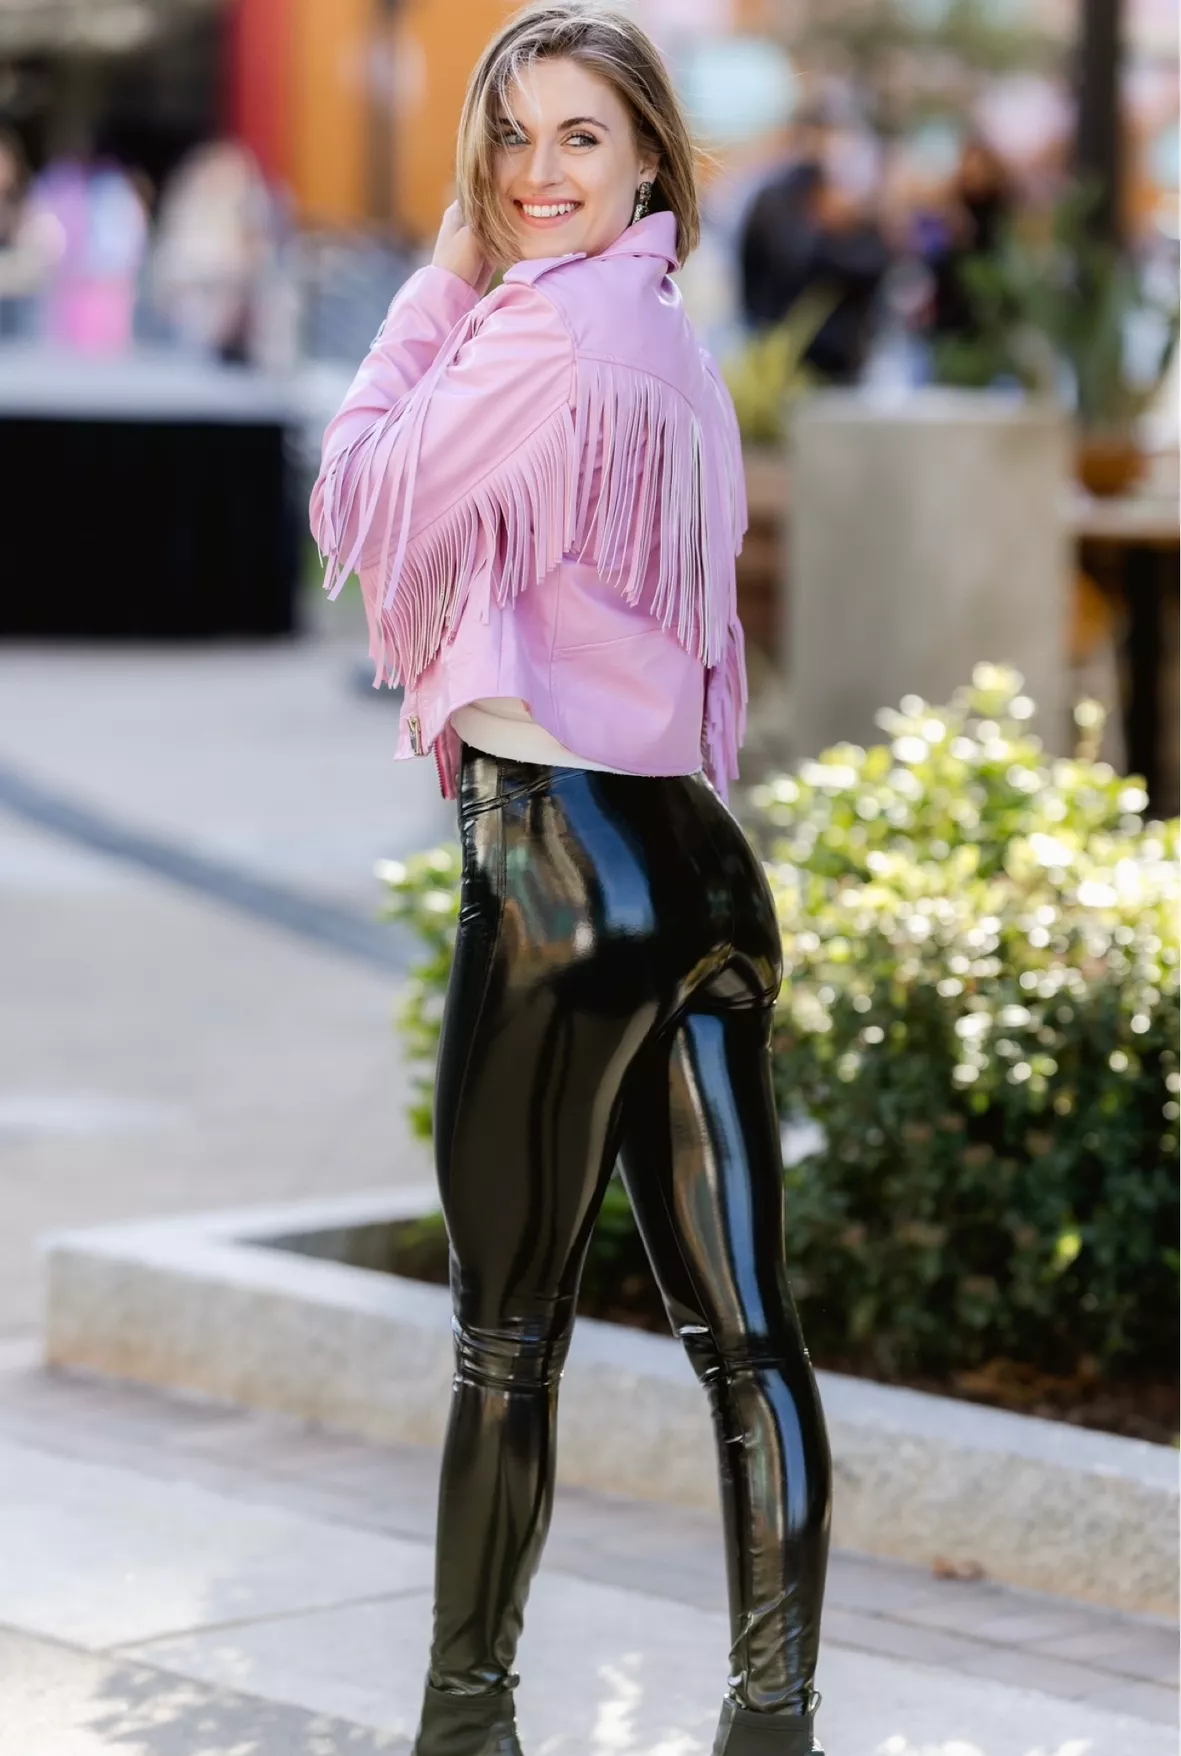 SPANX Patent Leather Leather Pants for Women